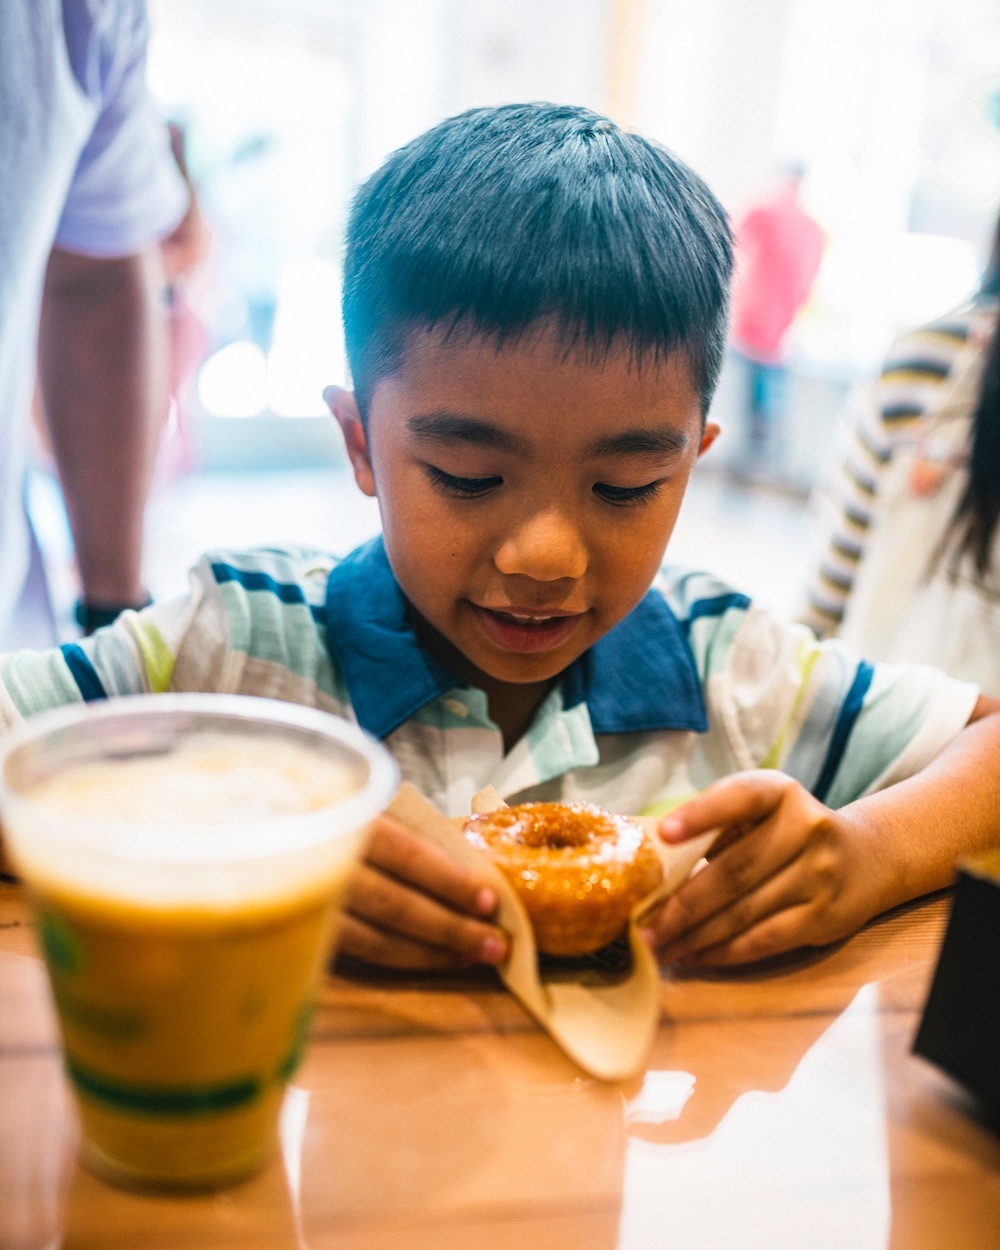 It's World Vegan Month! Find delectable eats and treats throughout Ward Village. Think chia fruit cups @aliicoffeeco, donuts @holeygraildonuts, pho @piggysmallshawaii, and roasted Turkish cauliflower @istanbulhawaii, to name just a few.